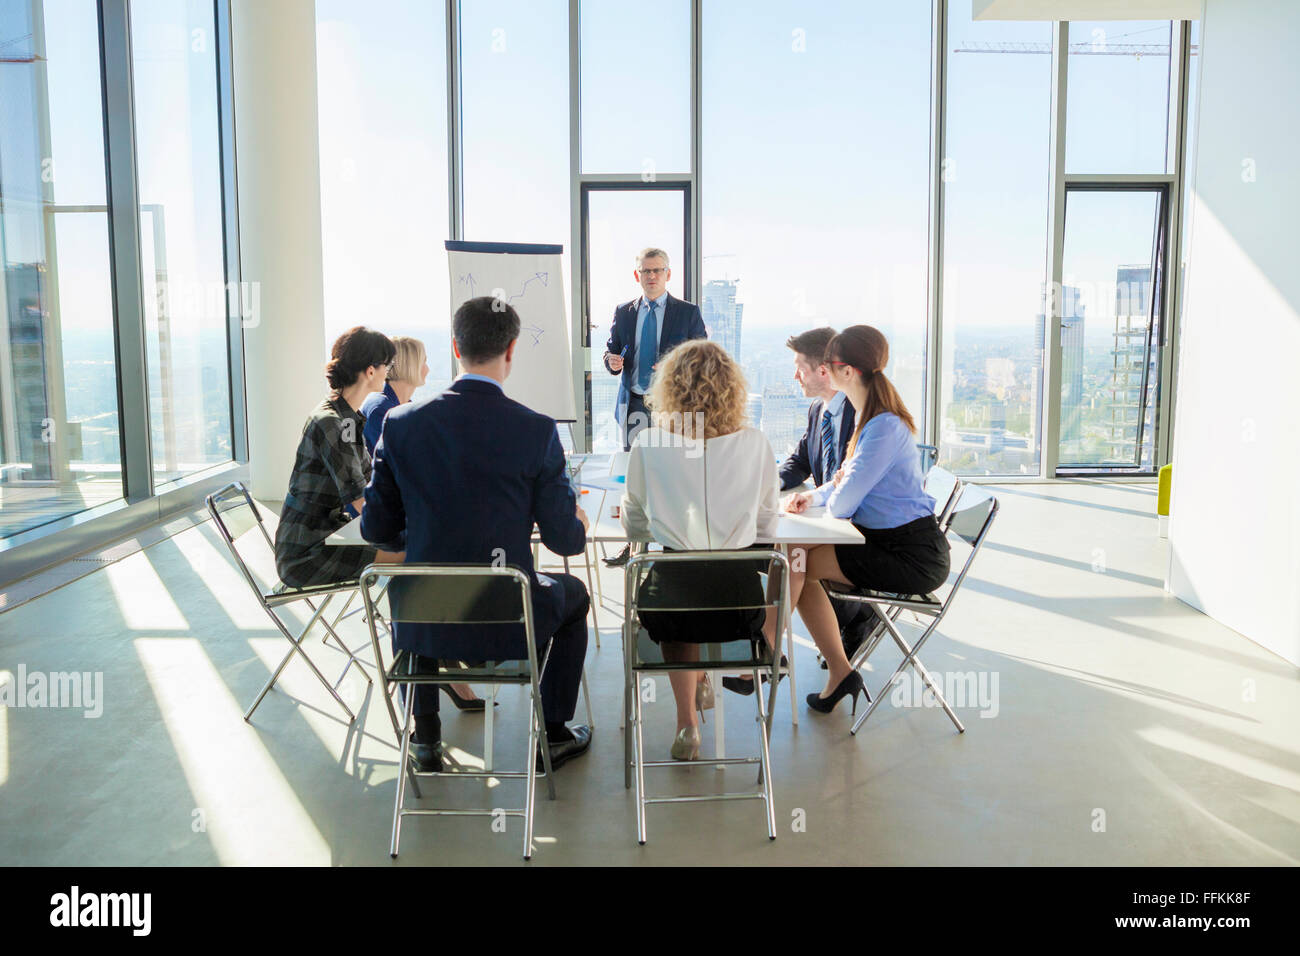 Team of architects in business meeting Stock Photo